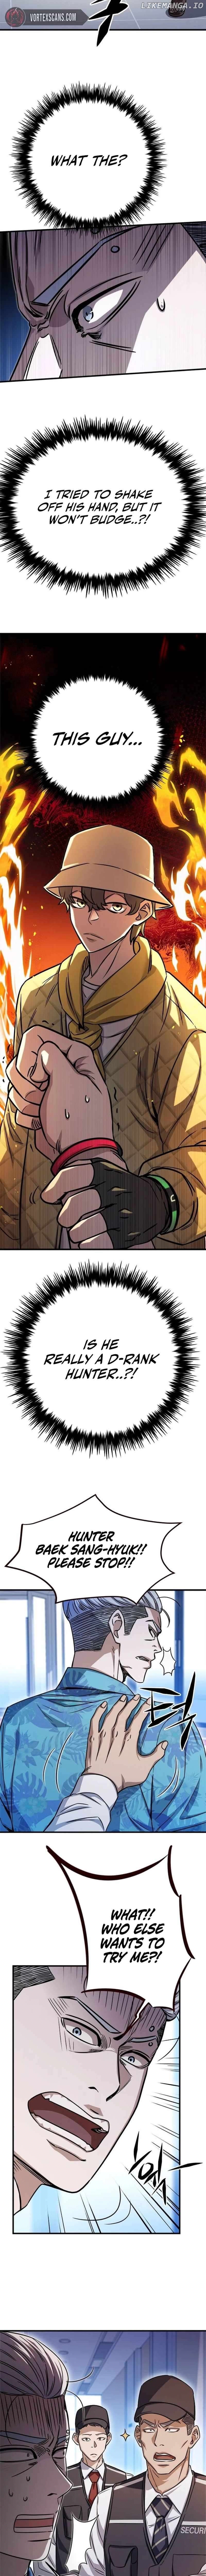 The legendary hunter becomes young again Chapter 9 - page 15